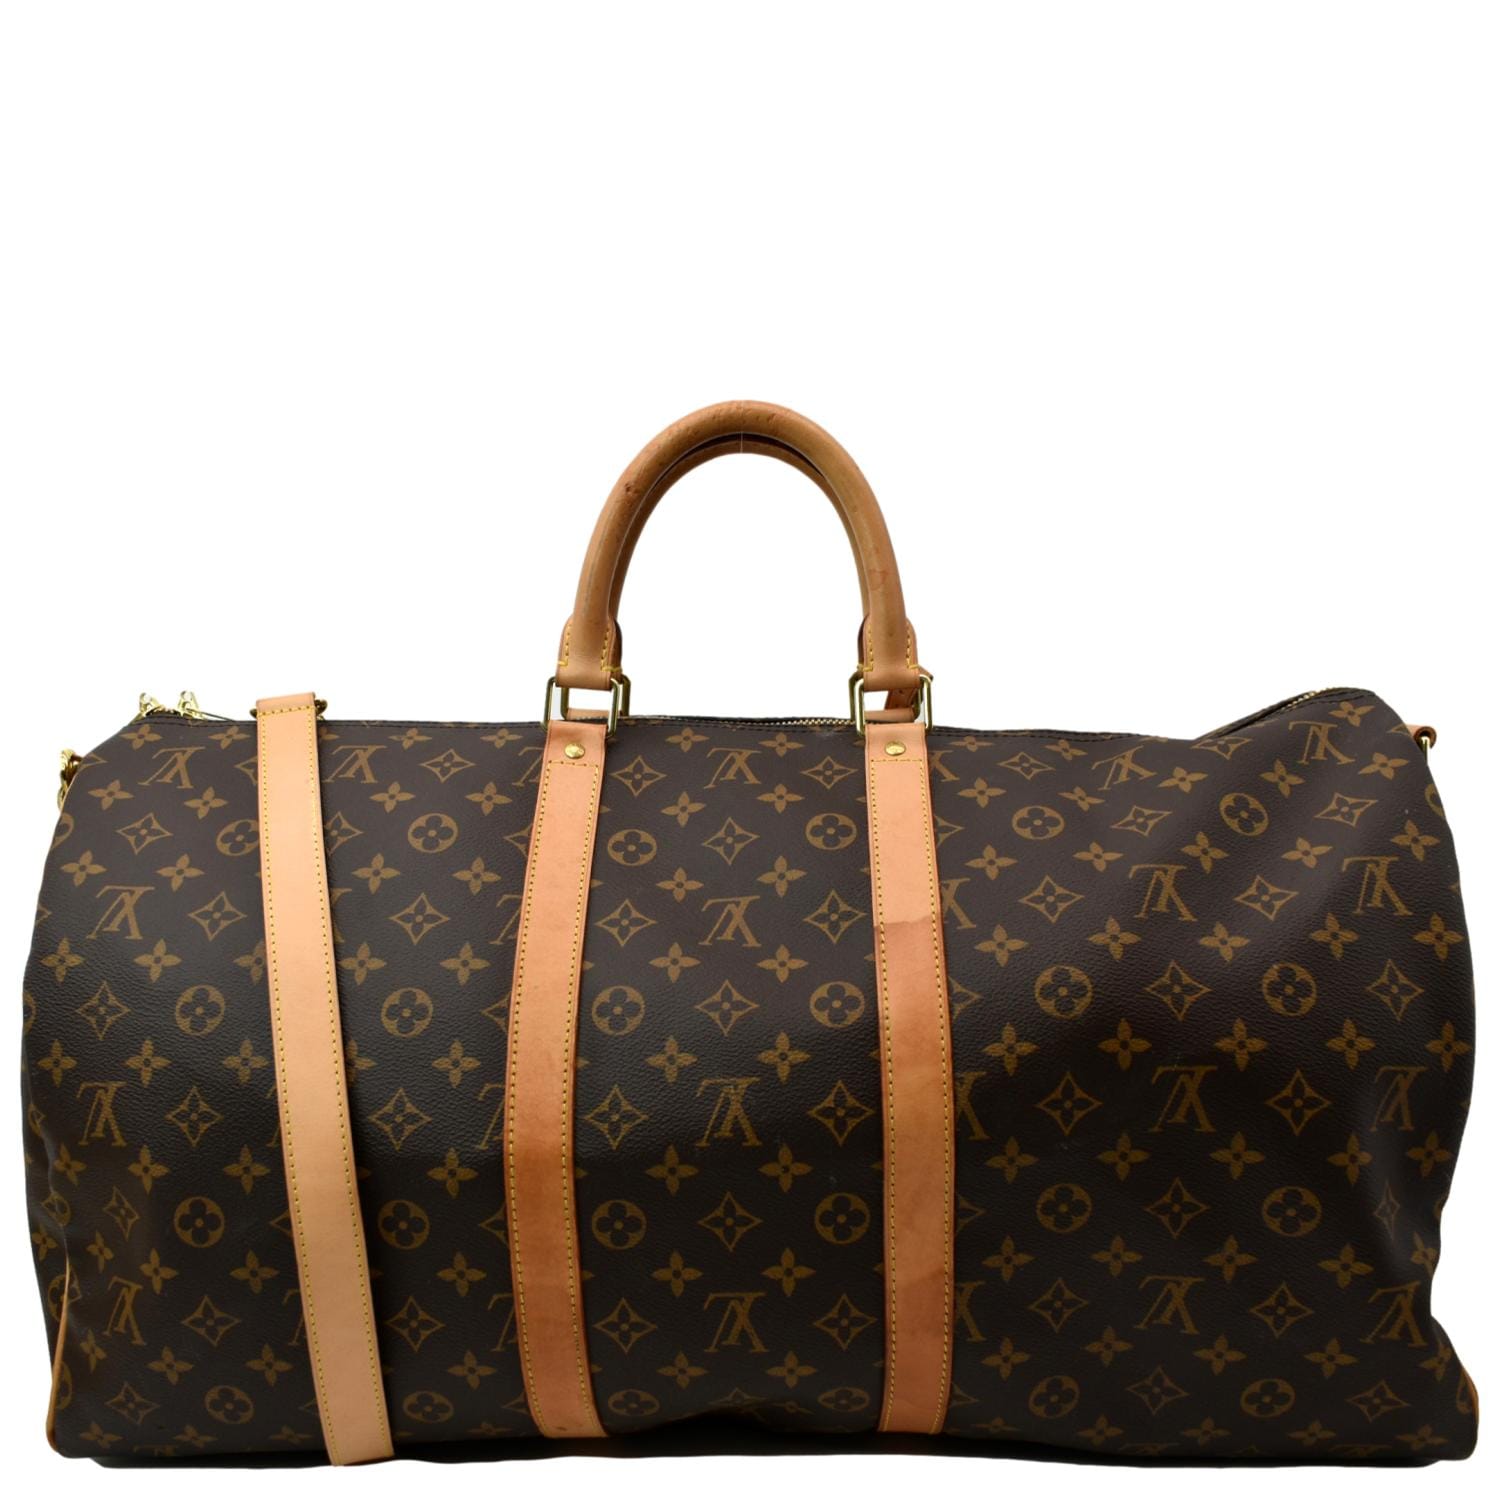 LOUIS VUITTON Keepall 55 Bag In Brown Monogram Canvas For Sale at